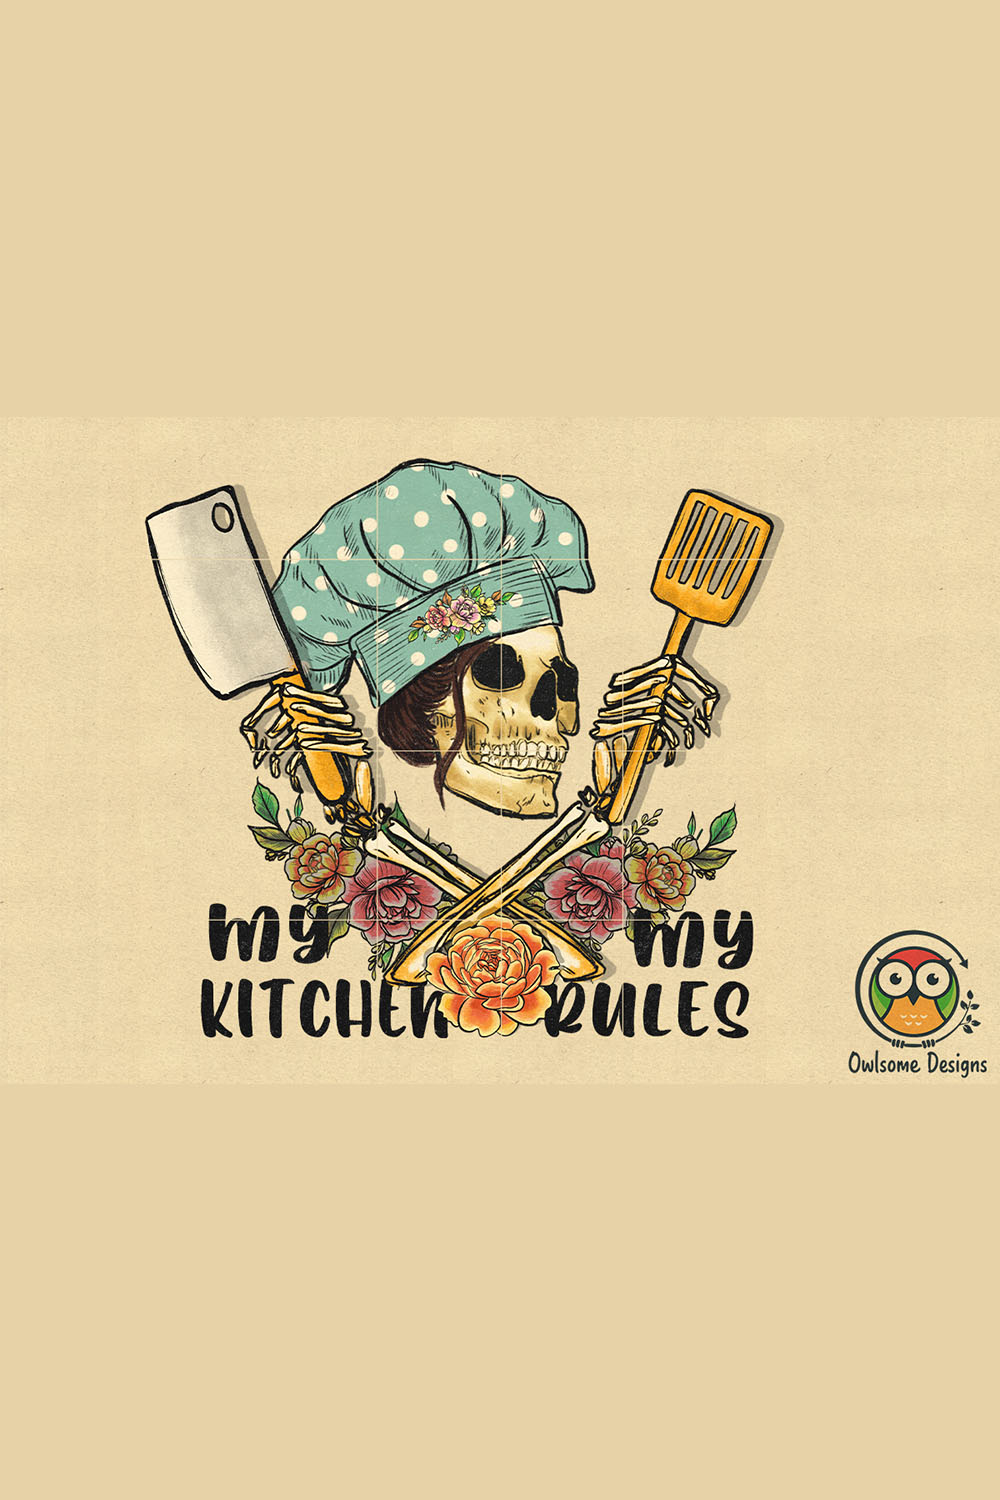 Beautiful image of a skeleton with kitchen accessories.